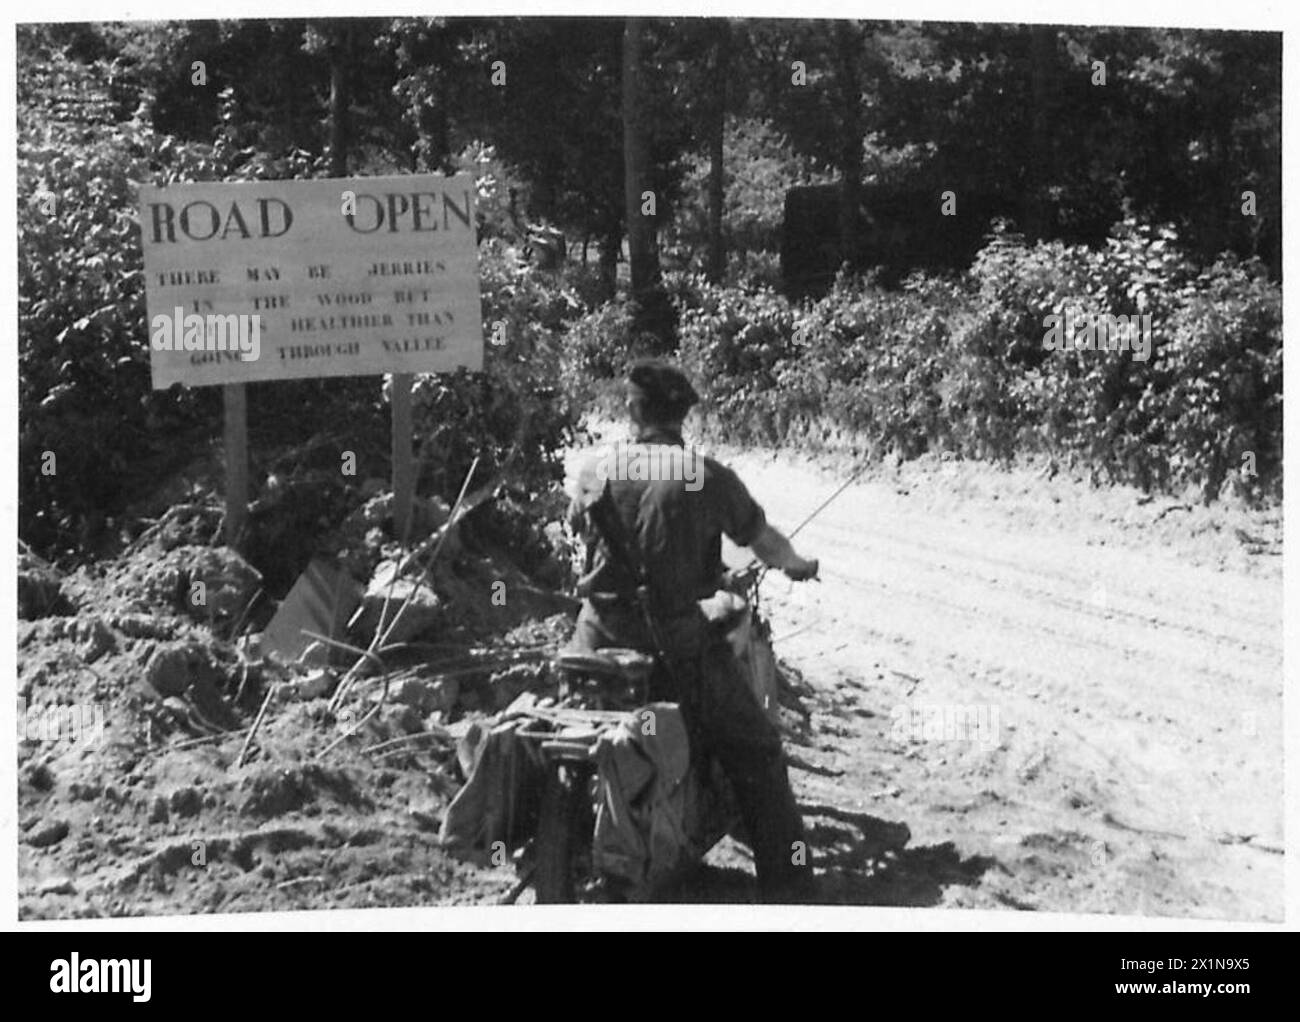 NORMANDY - VARIOUS - Motor cyclist reads a road sign that says 'Road Open - there may be Jerries in the woods but it is healthier than going through Vallee', British Army, 21st Army Group Stock Photo